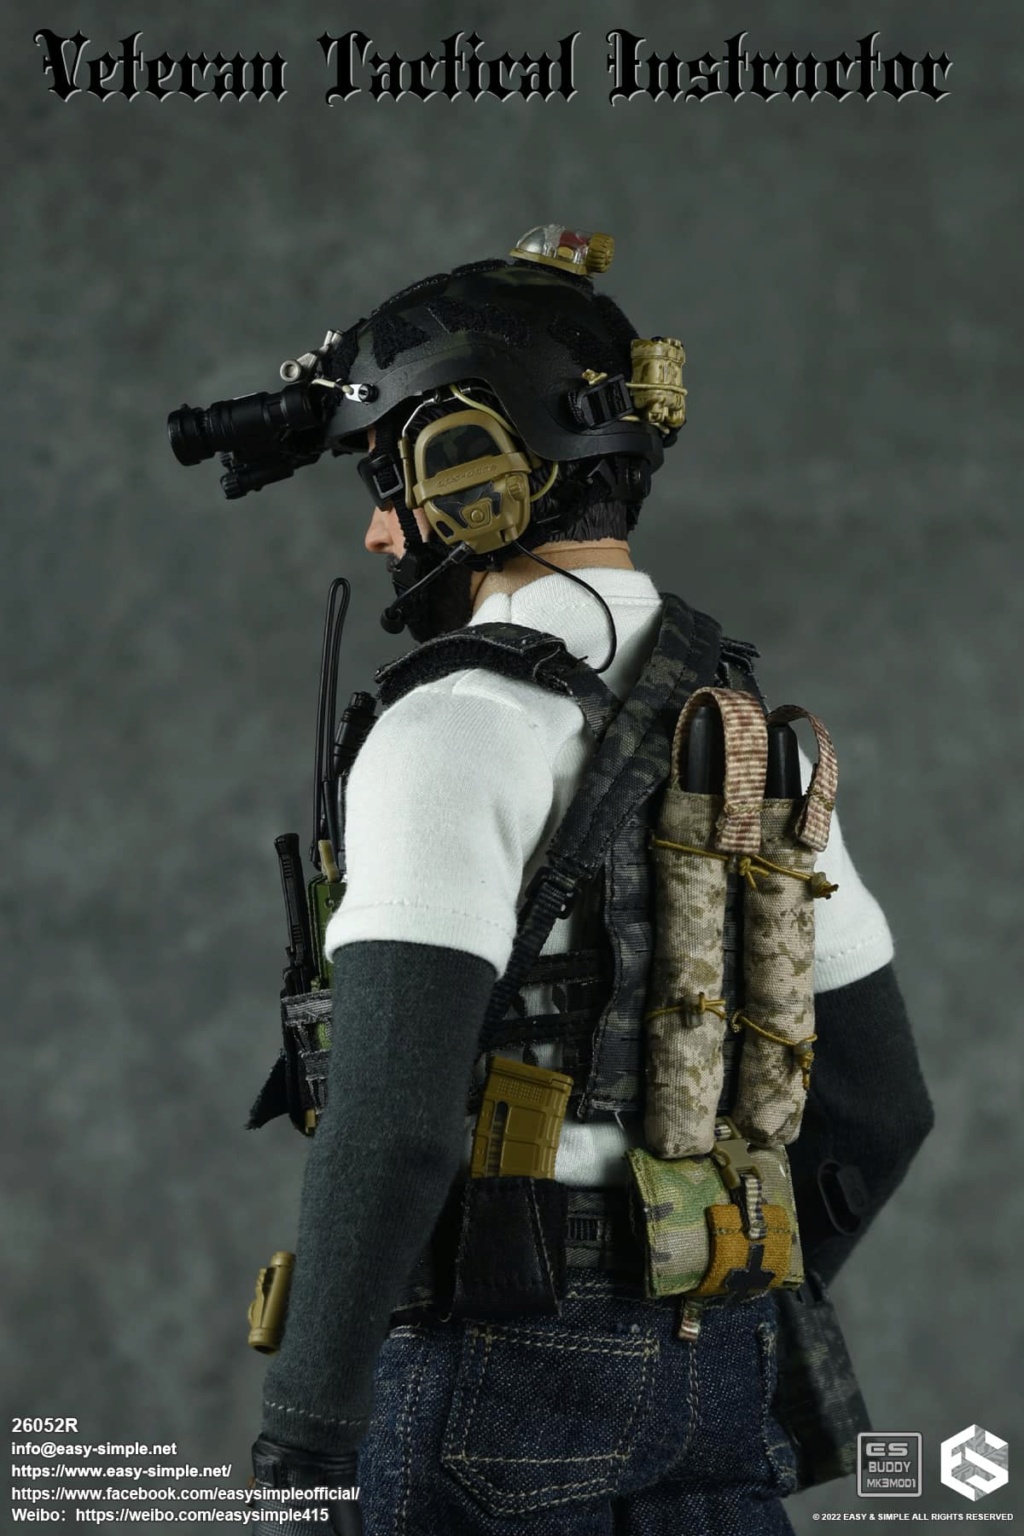 veterantacticalinstructor - NEW PRODUCT: Easy&Simple: 26052R 1/6 Scale Veteran Tactical Instructor 31159410